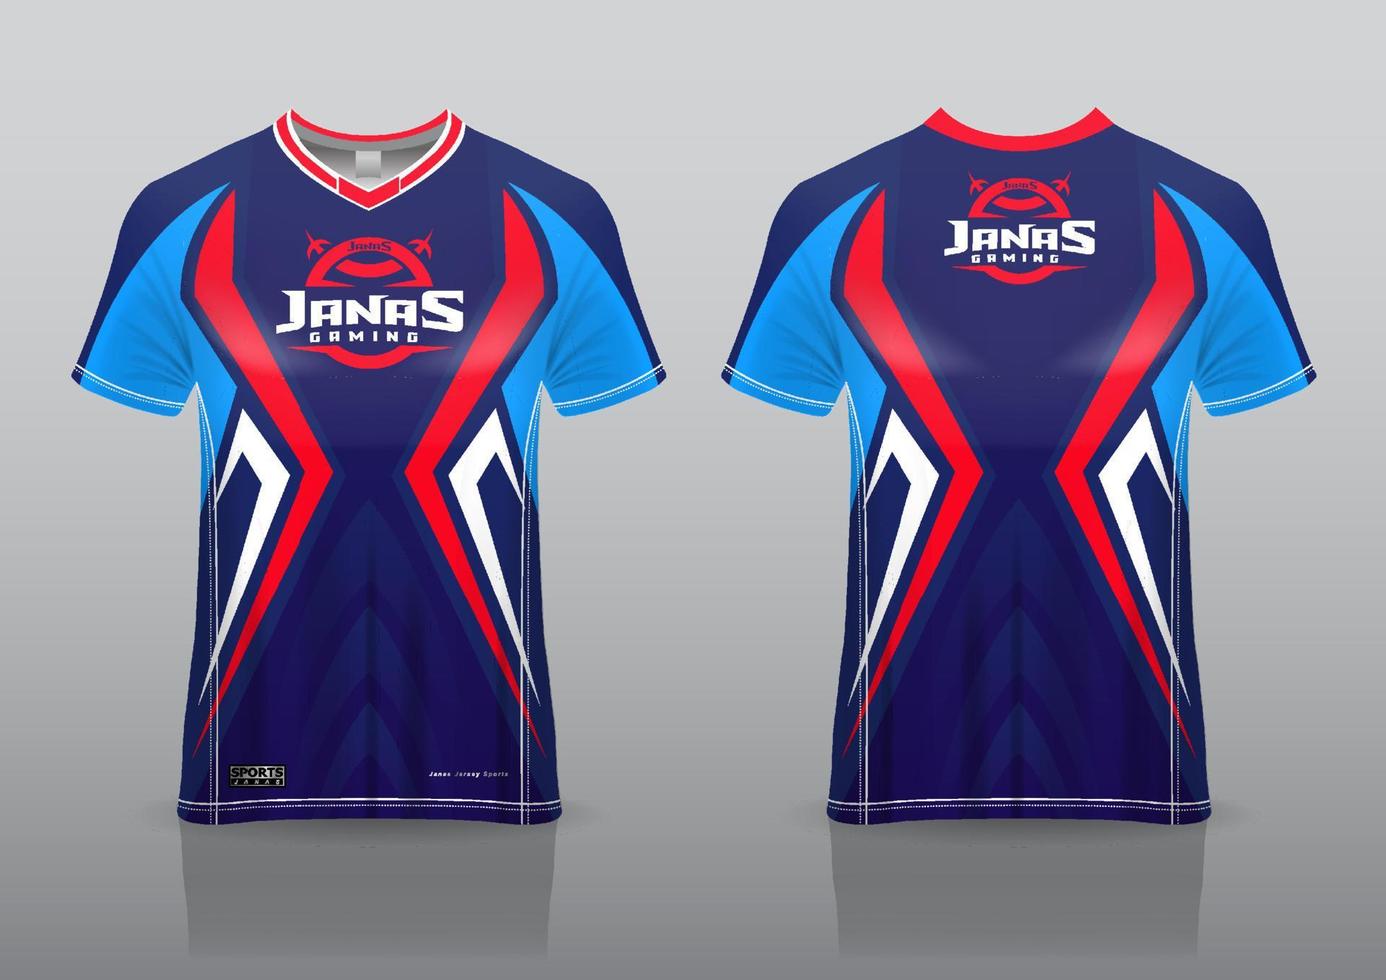 jersey esport gaming design front and back view vector